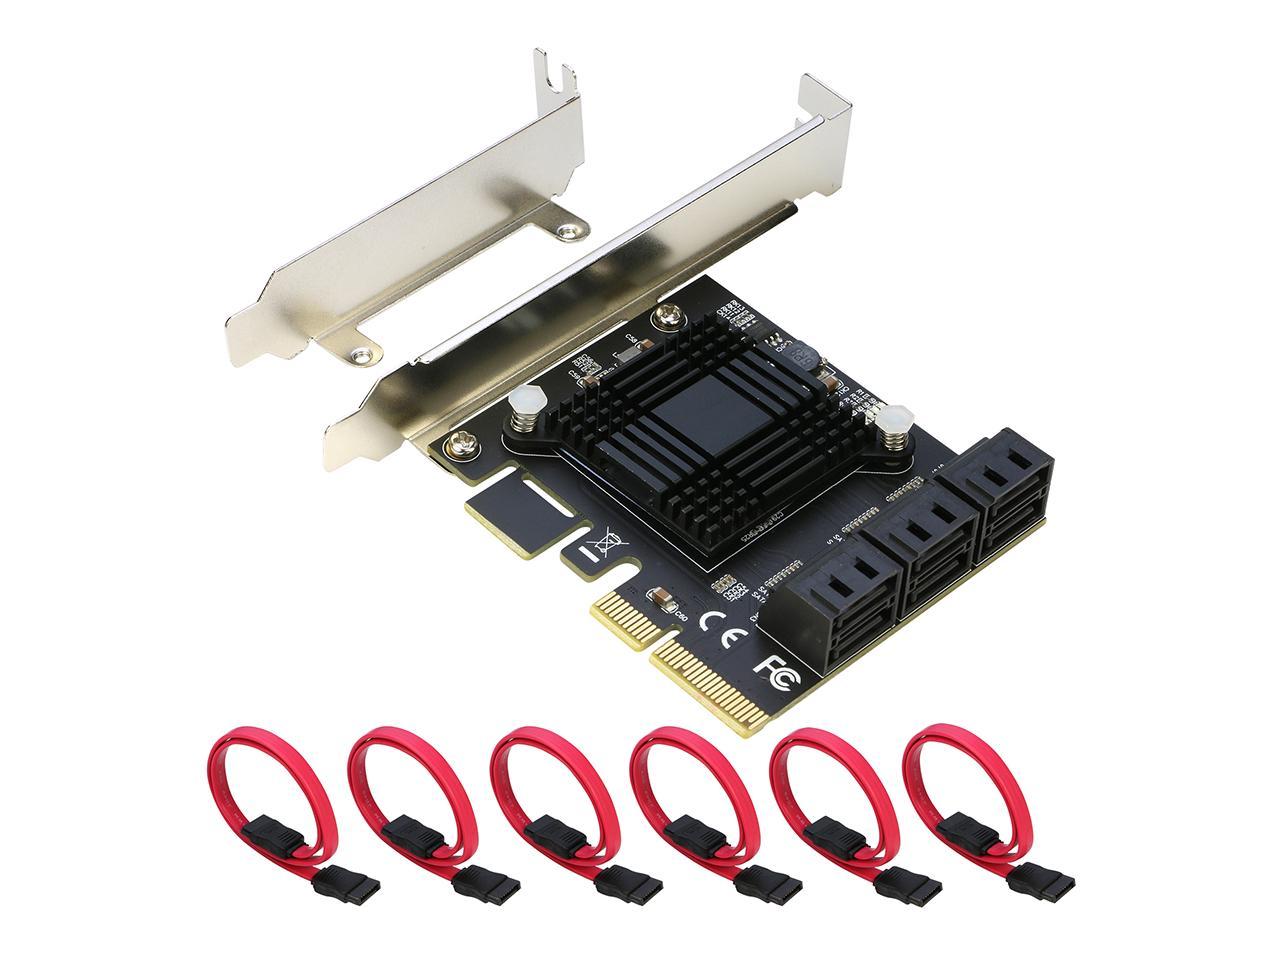 Redxiao PCI-E Card 6GBPS Bandwidth Transmission Plug and Play PCI-E to SATA 3.0 2-Port SATA Expansion Adapter Boards 